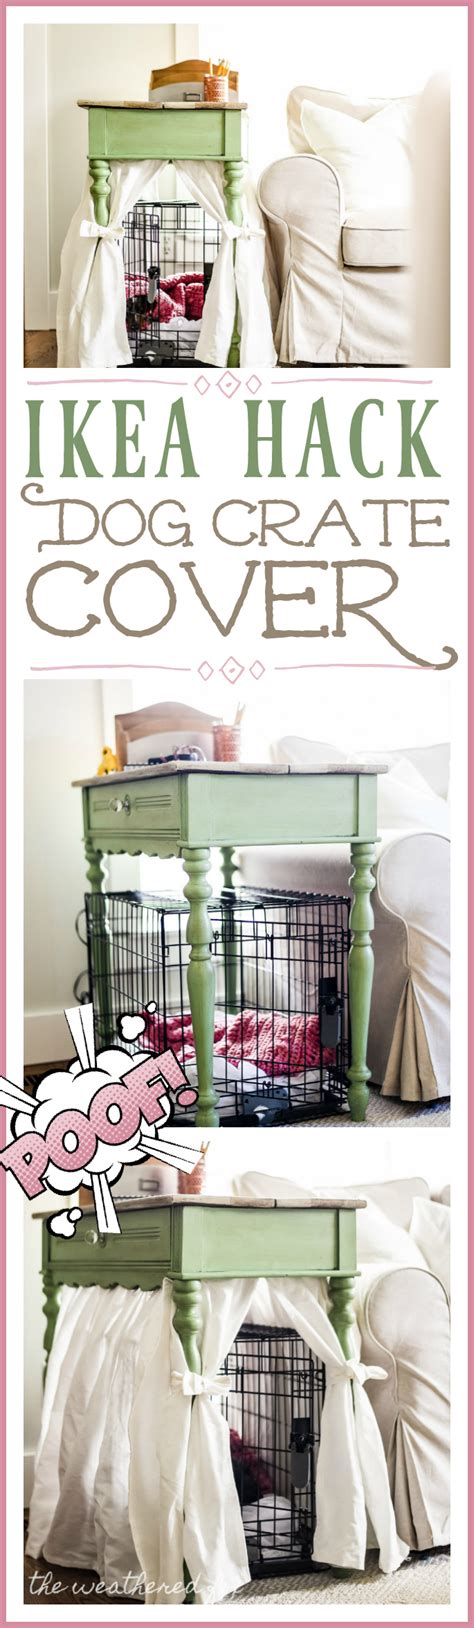 Covering the crate will help your dog settle in, relax and go to sleep, particularly when an anxious dog is trying to hide from stress. DIY Dog Crate Cover. Ten Minute Farmhouse Style Ikea ...